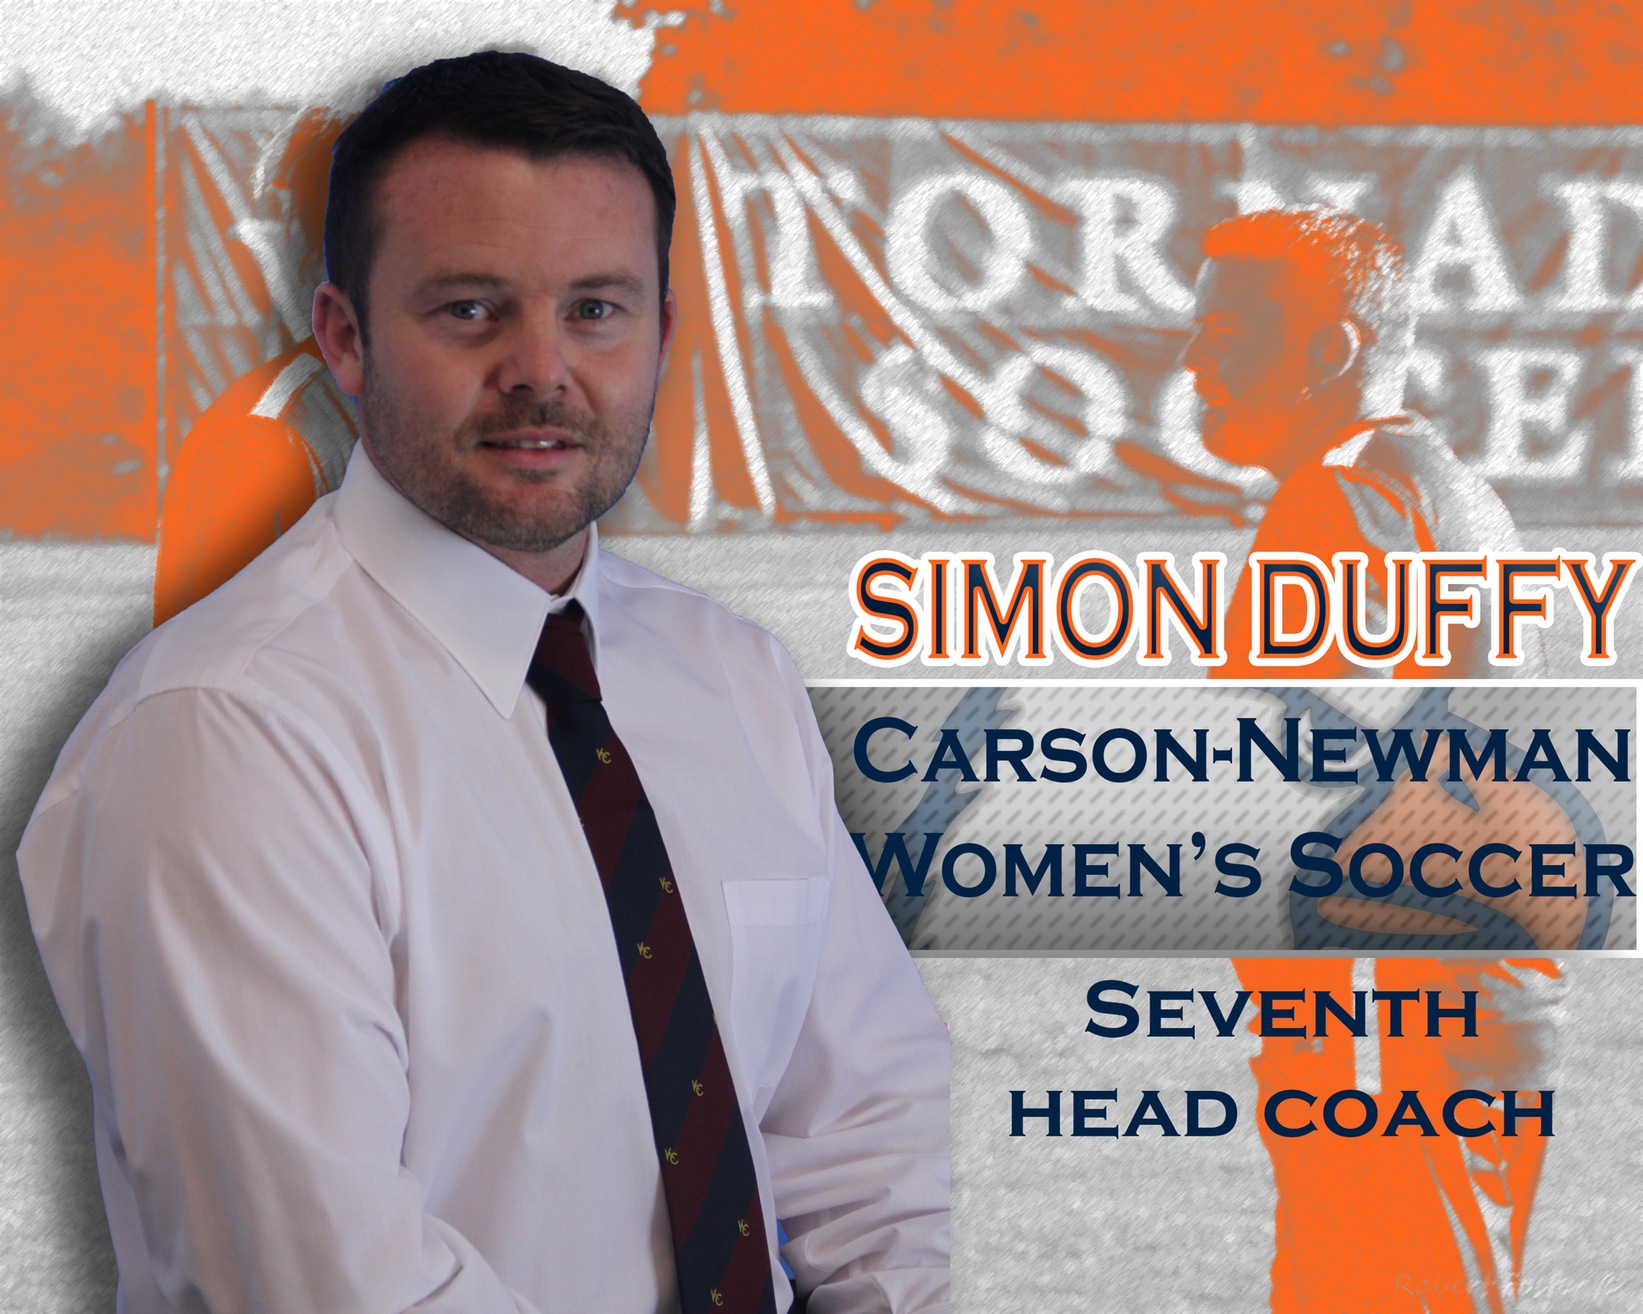 Duffy selected as seventh women's soccer head coach at Mossy Creek